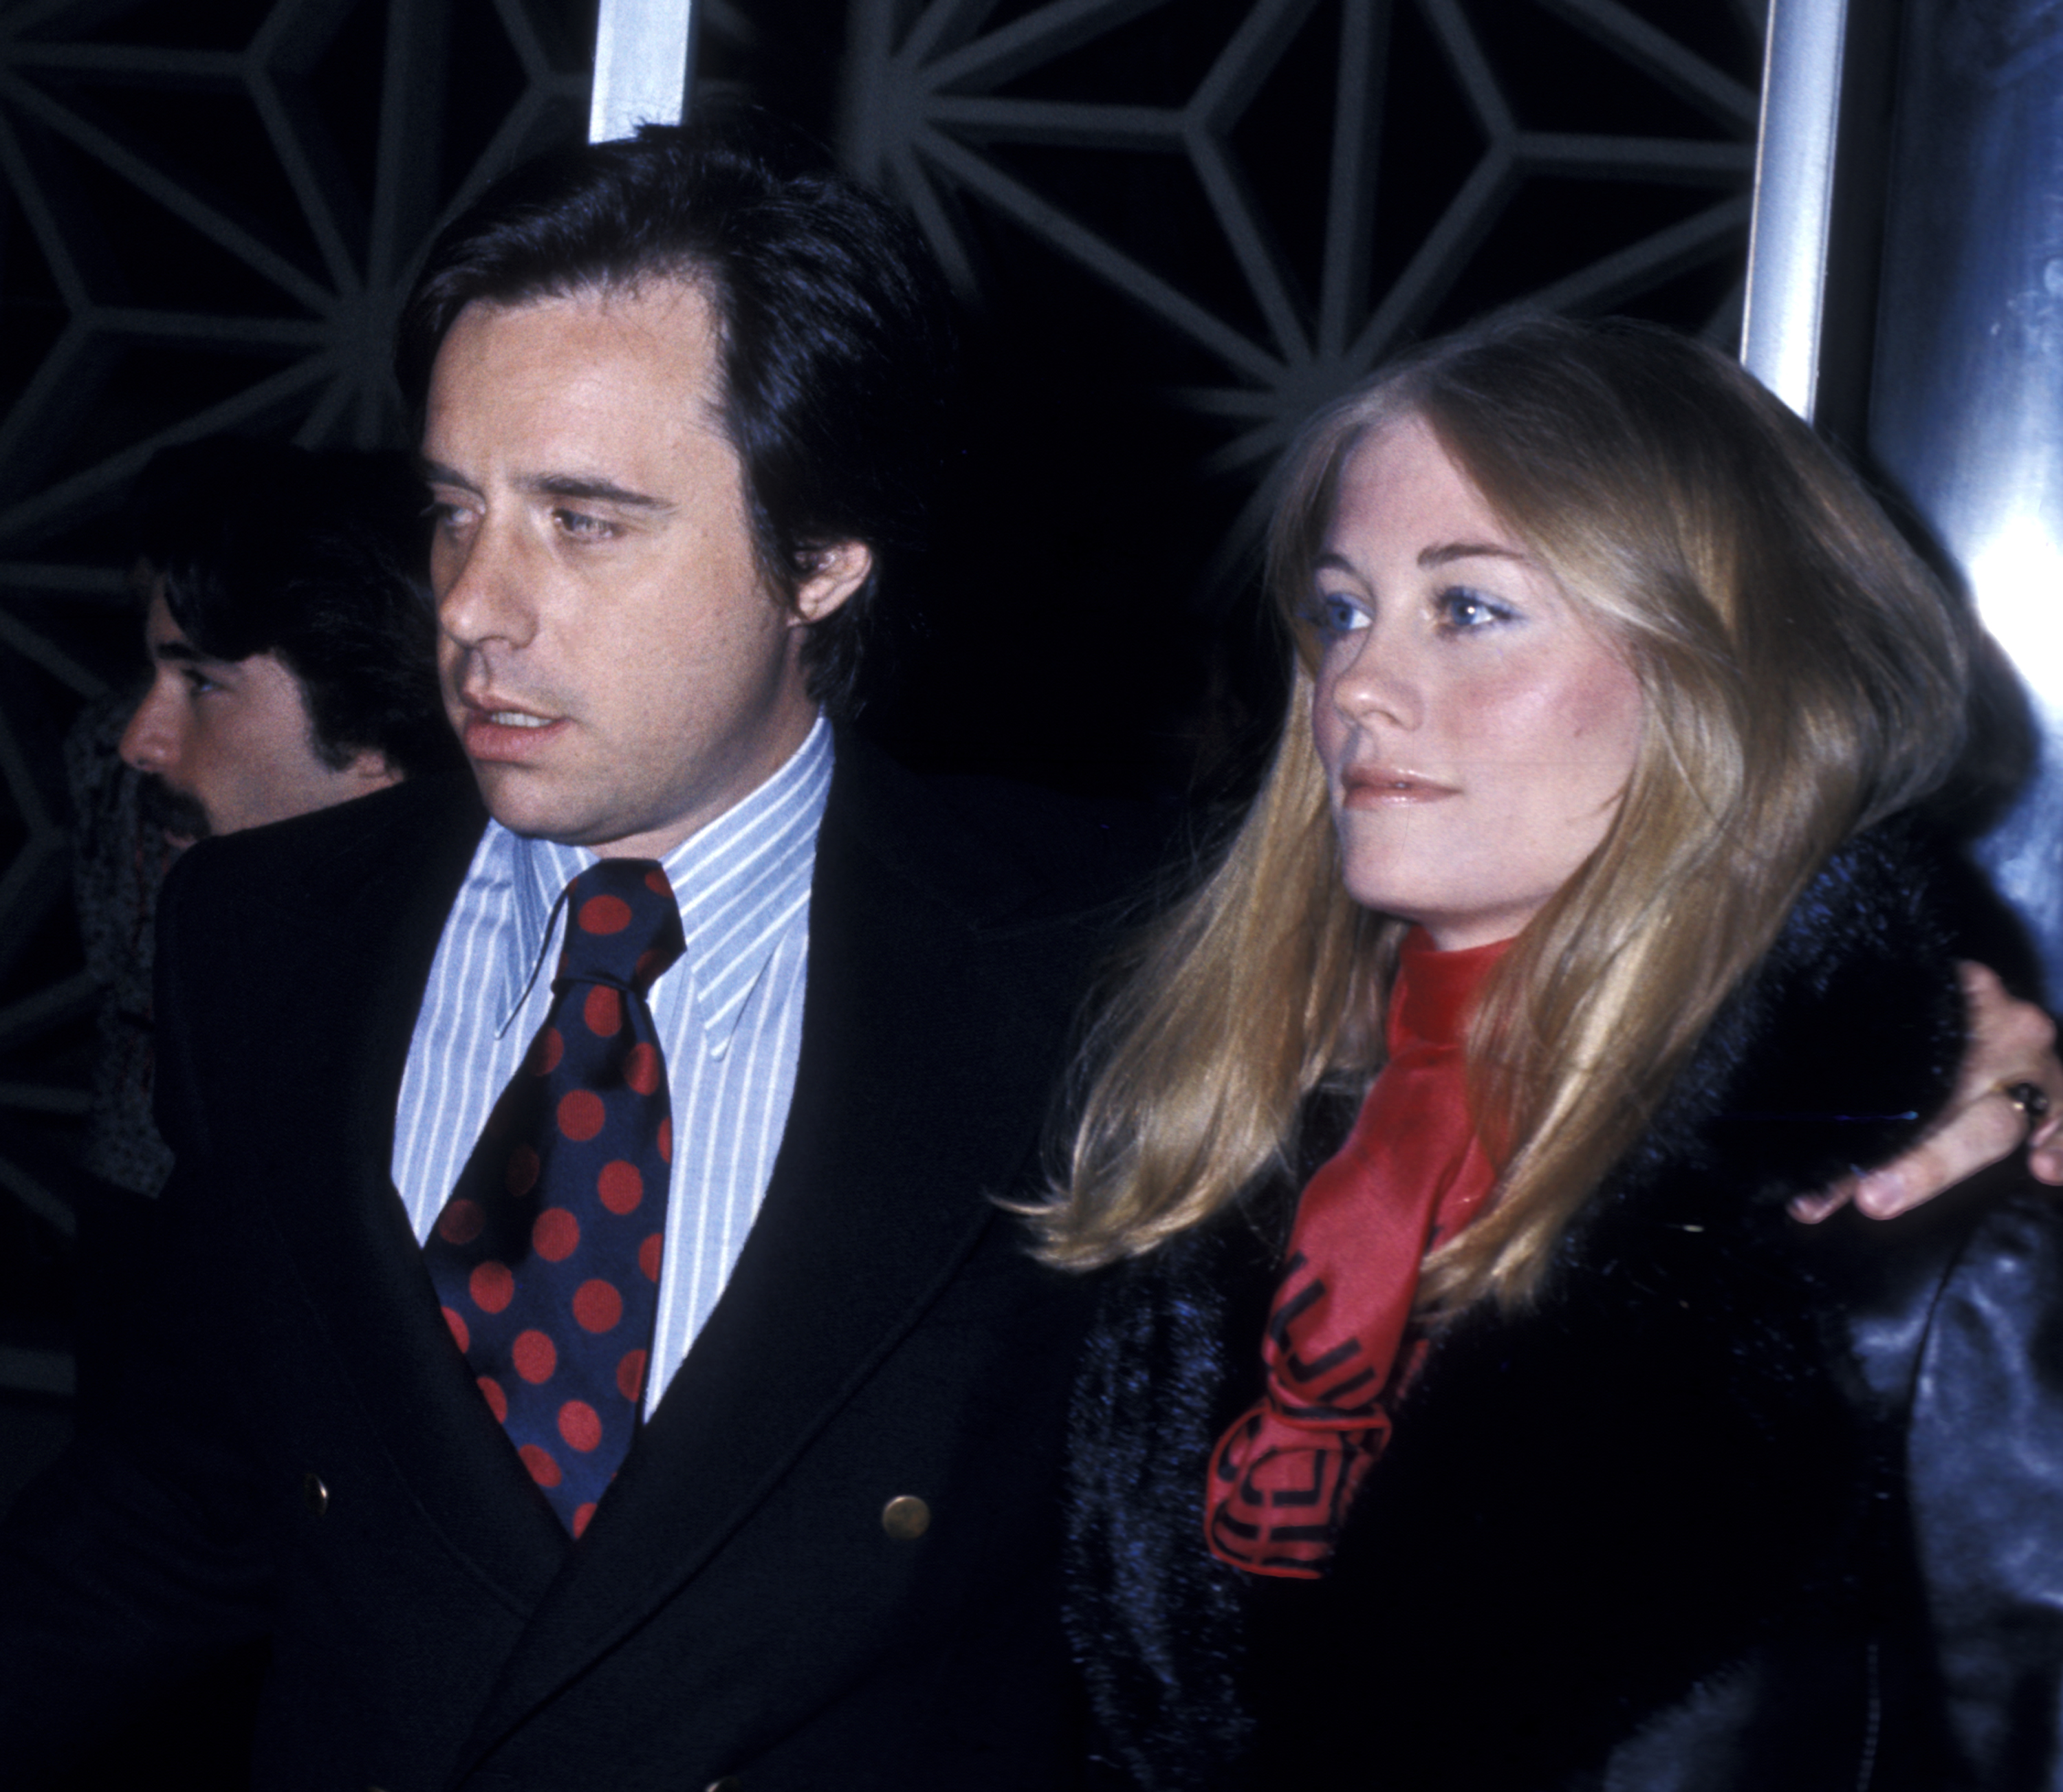 Peter Bogdanovich and Cybill Shephard at the premiere of "Paper Moon" on April 9, 1973, in Hollywood, California. | Source: Getty Images